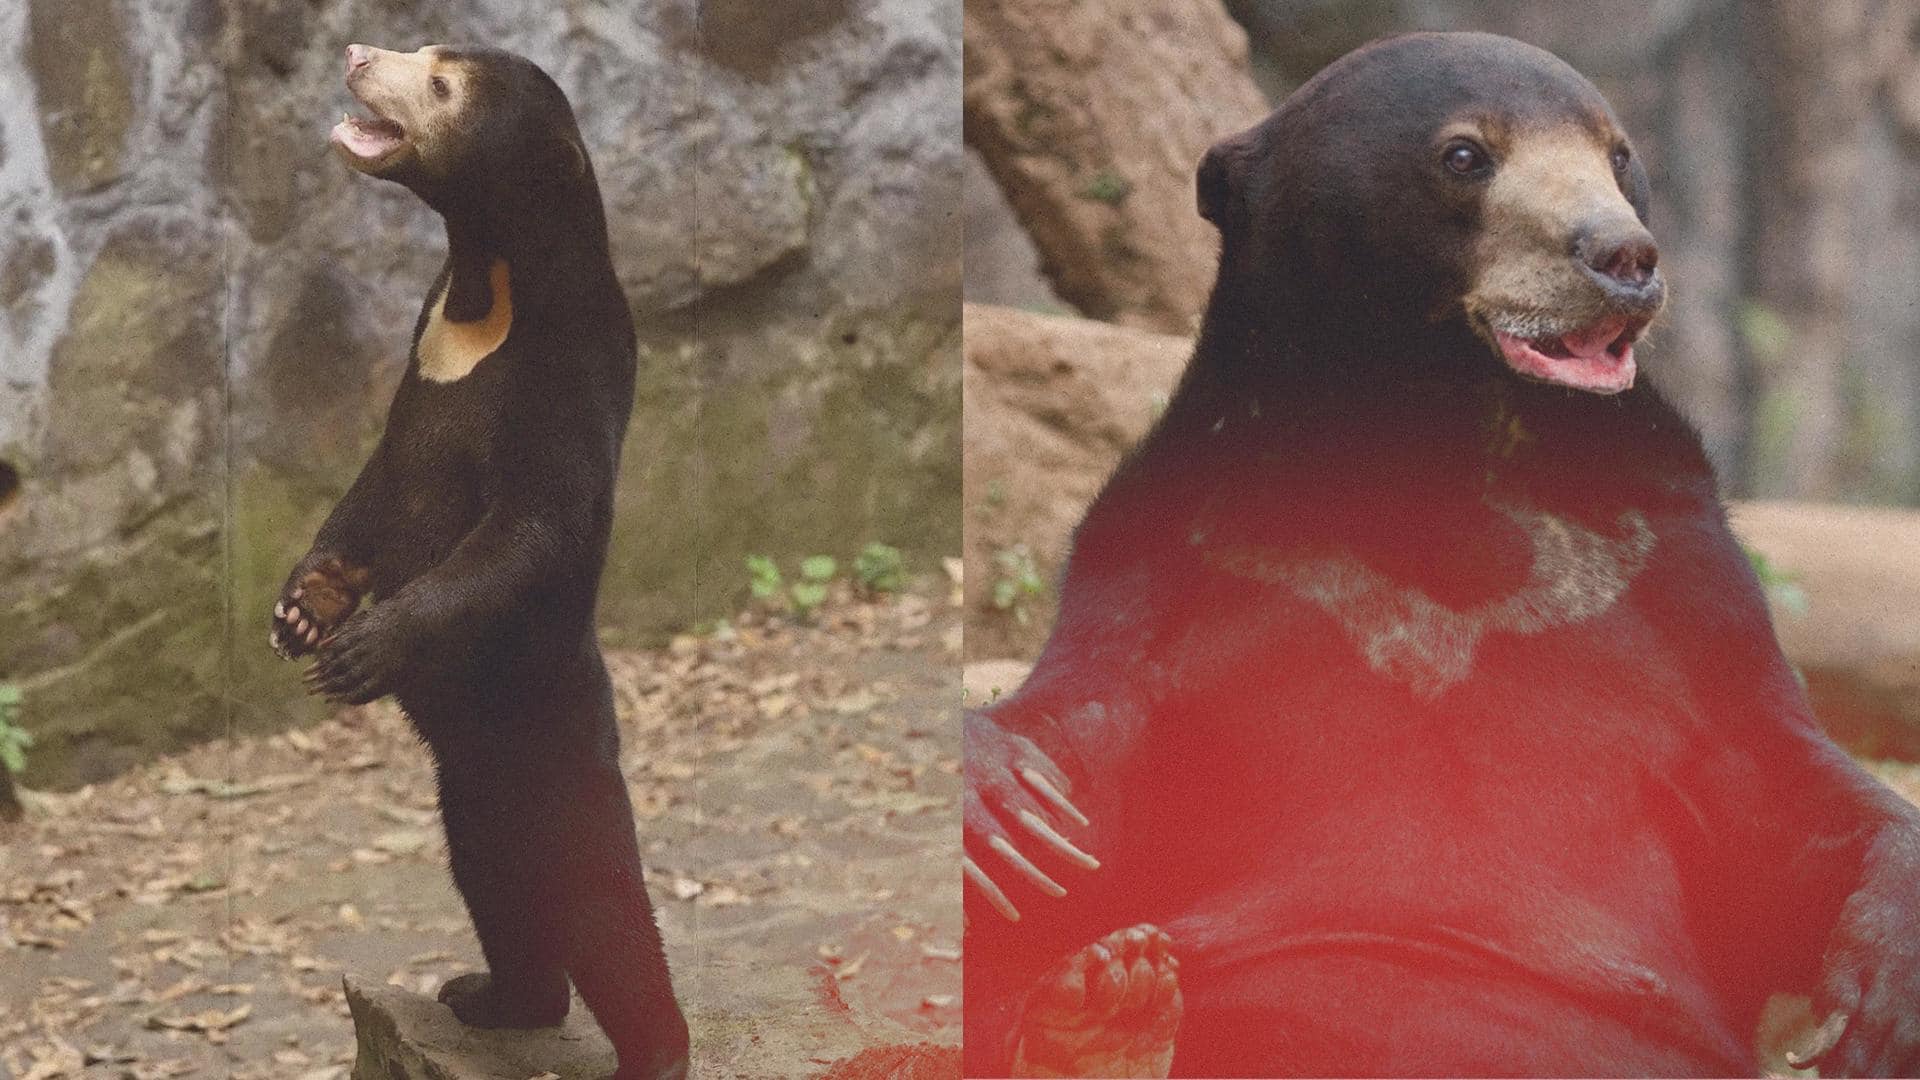 China zoo bears real or humans in costume? Here's truth